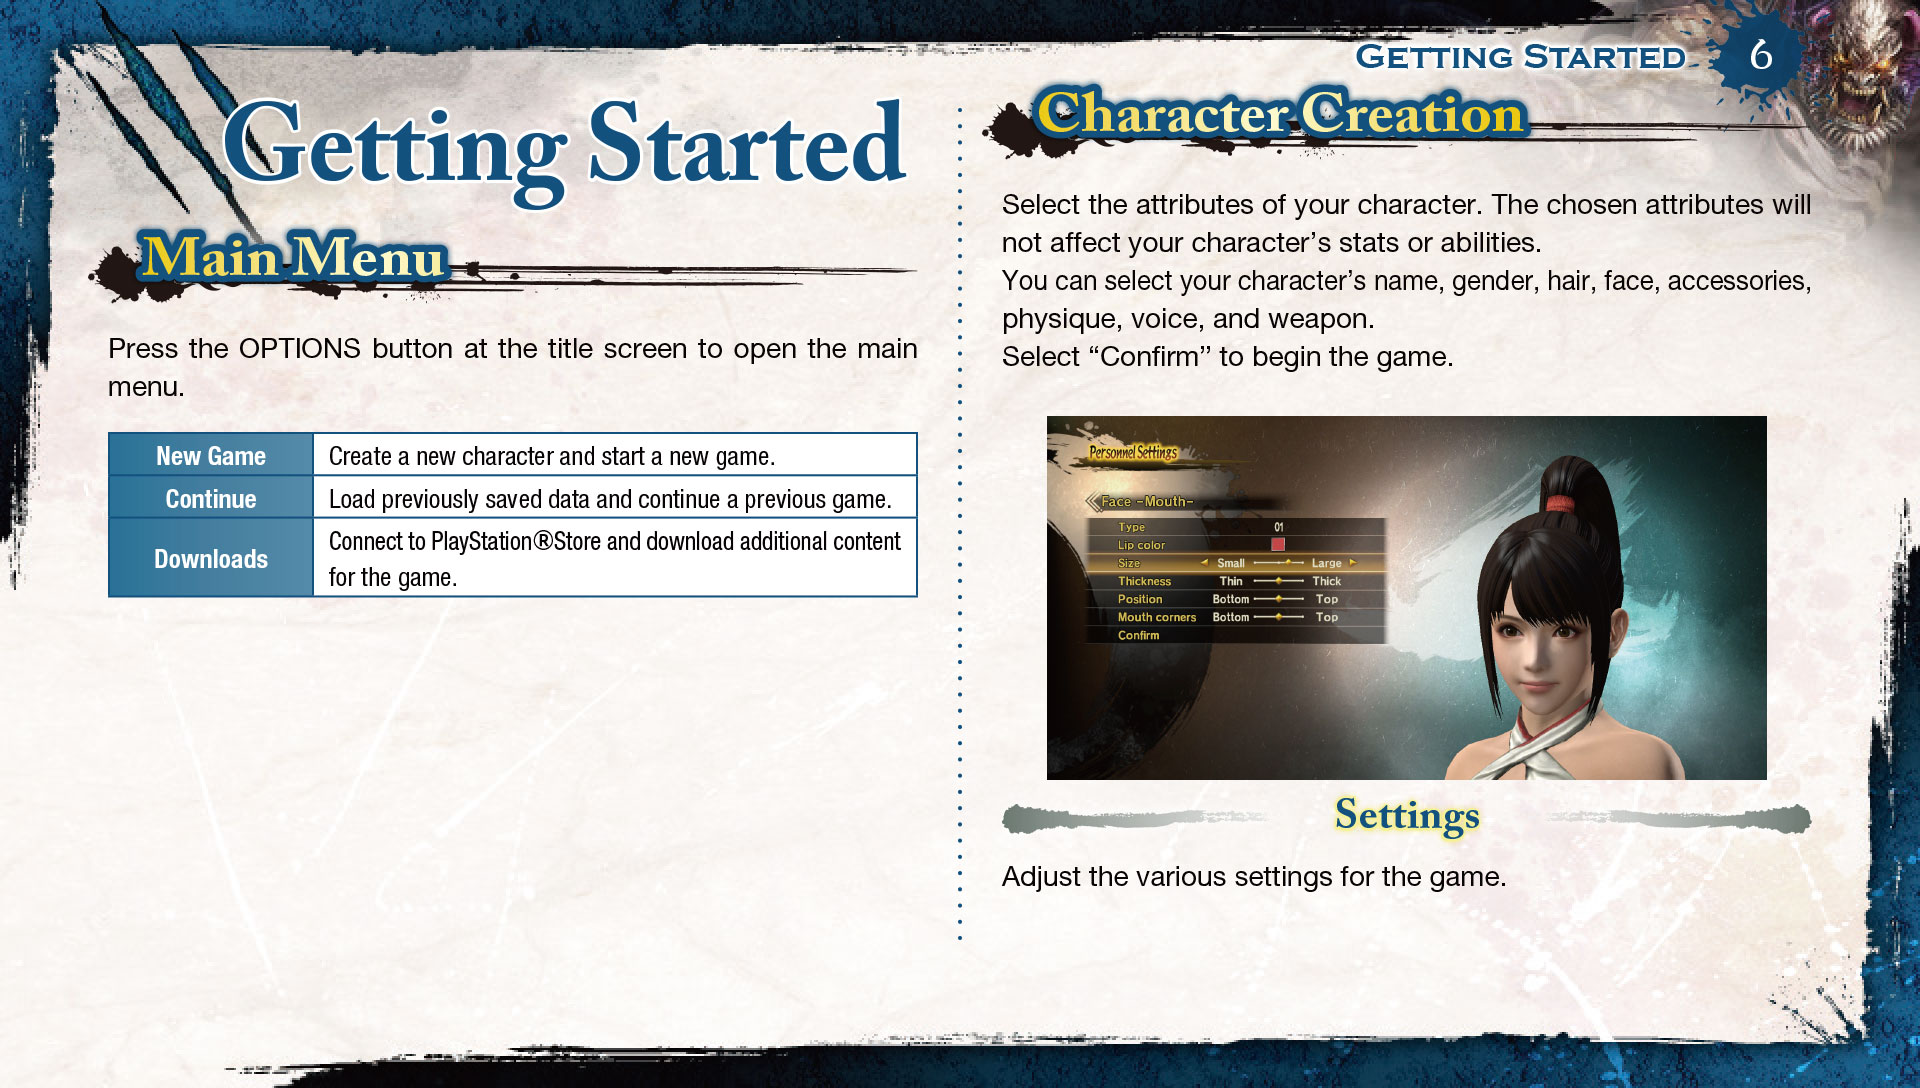 Getting Started, Game Manual